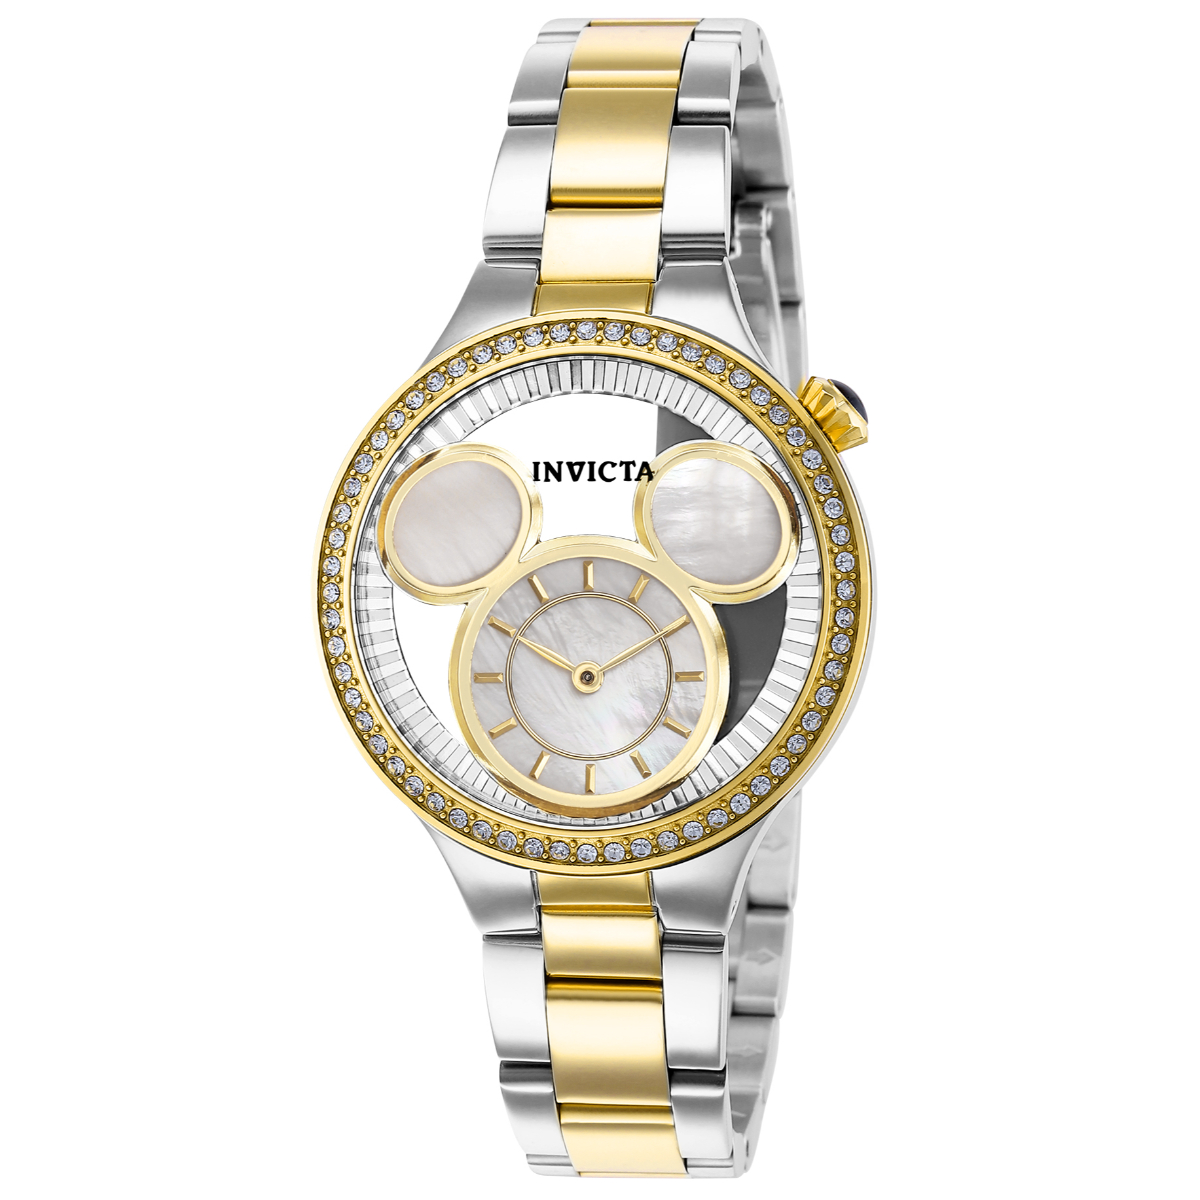 Invicta Disney Limited Edition Women's Watch w/ Metal & Mother of Pearl Dial - 35mm, Steel, Gold (36265)